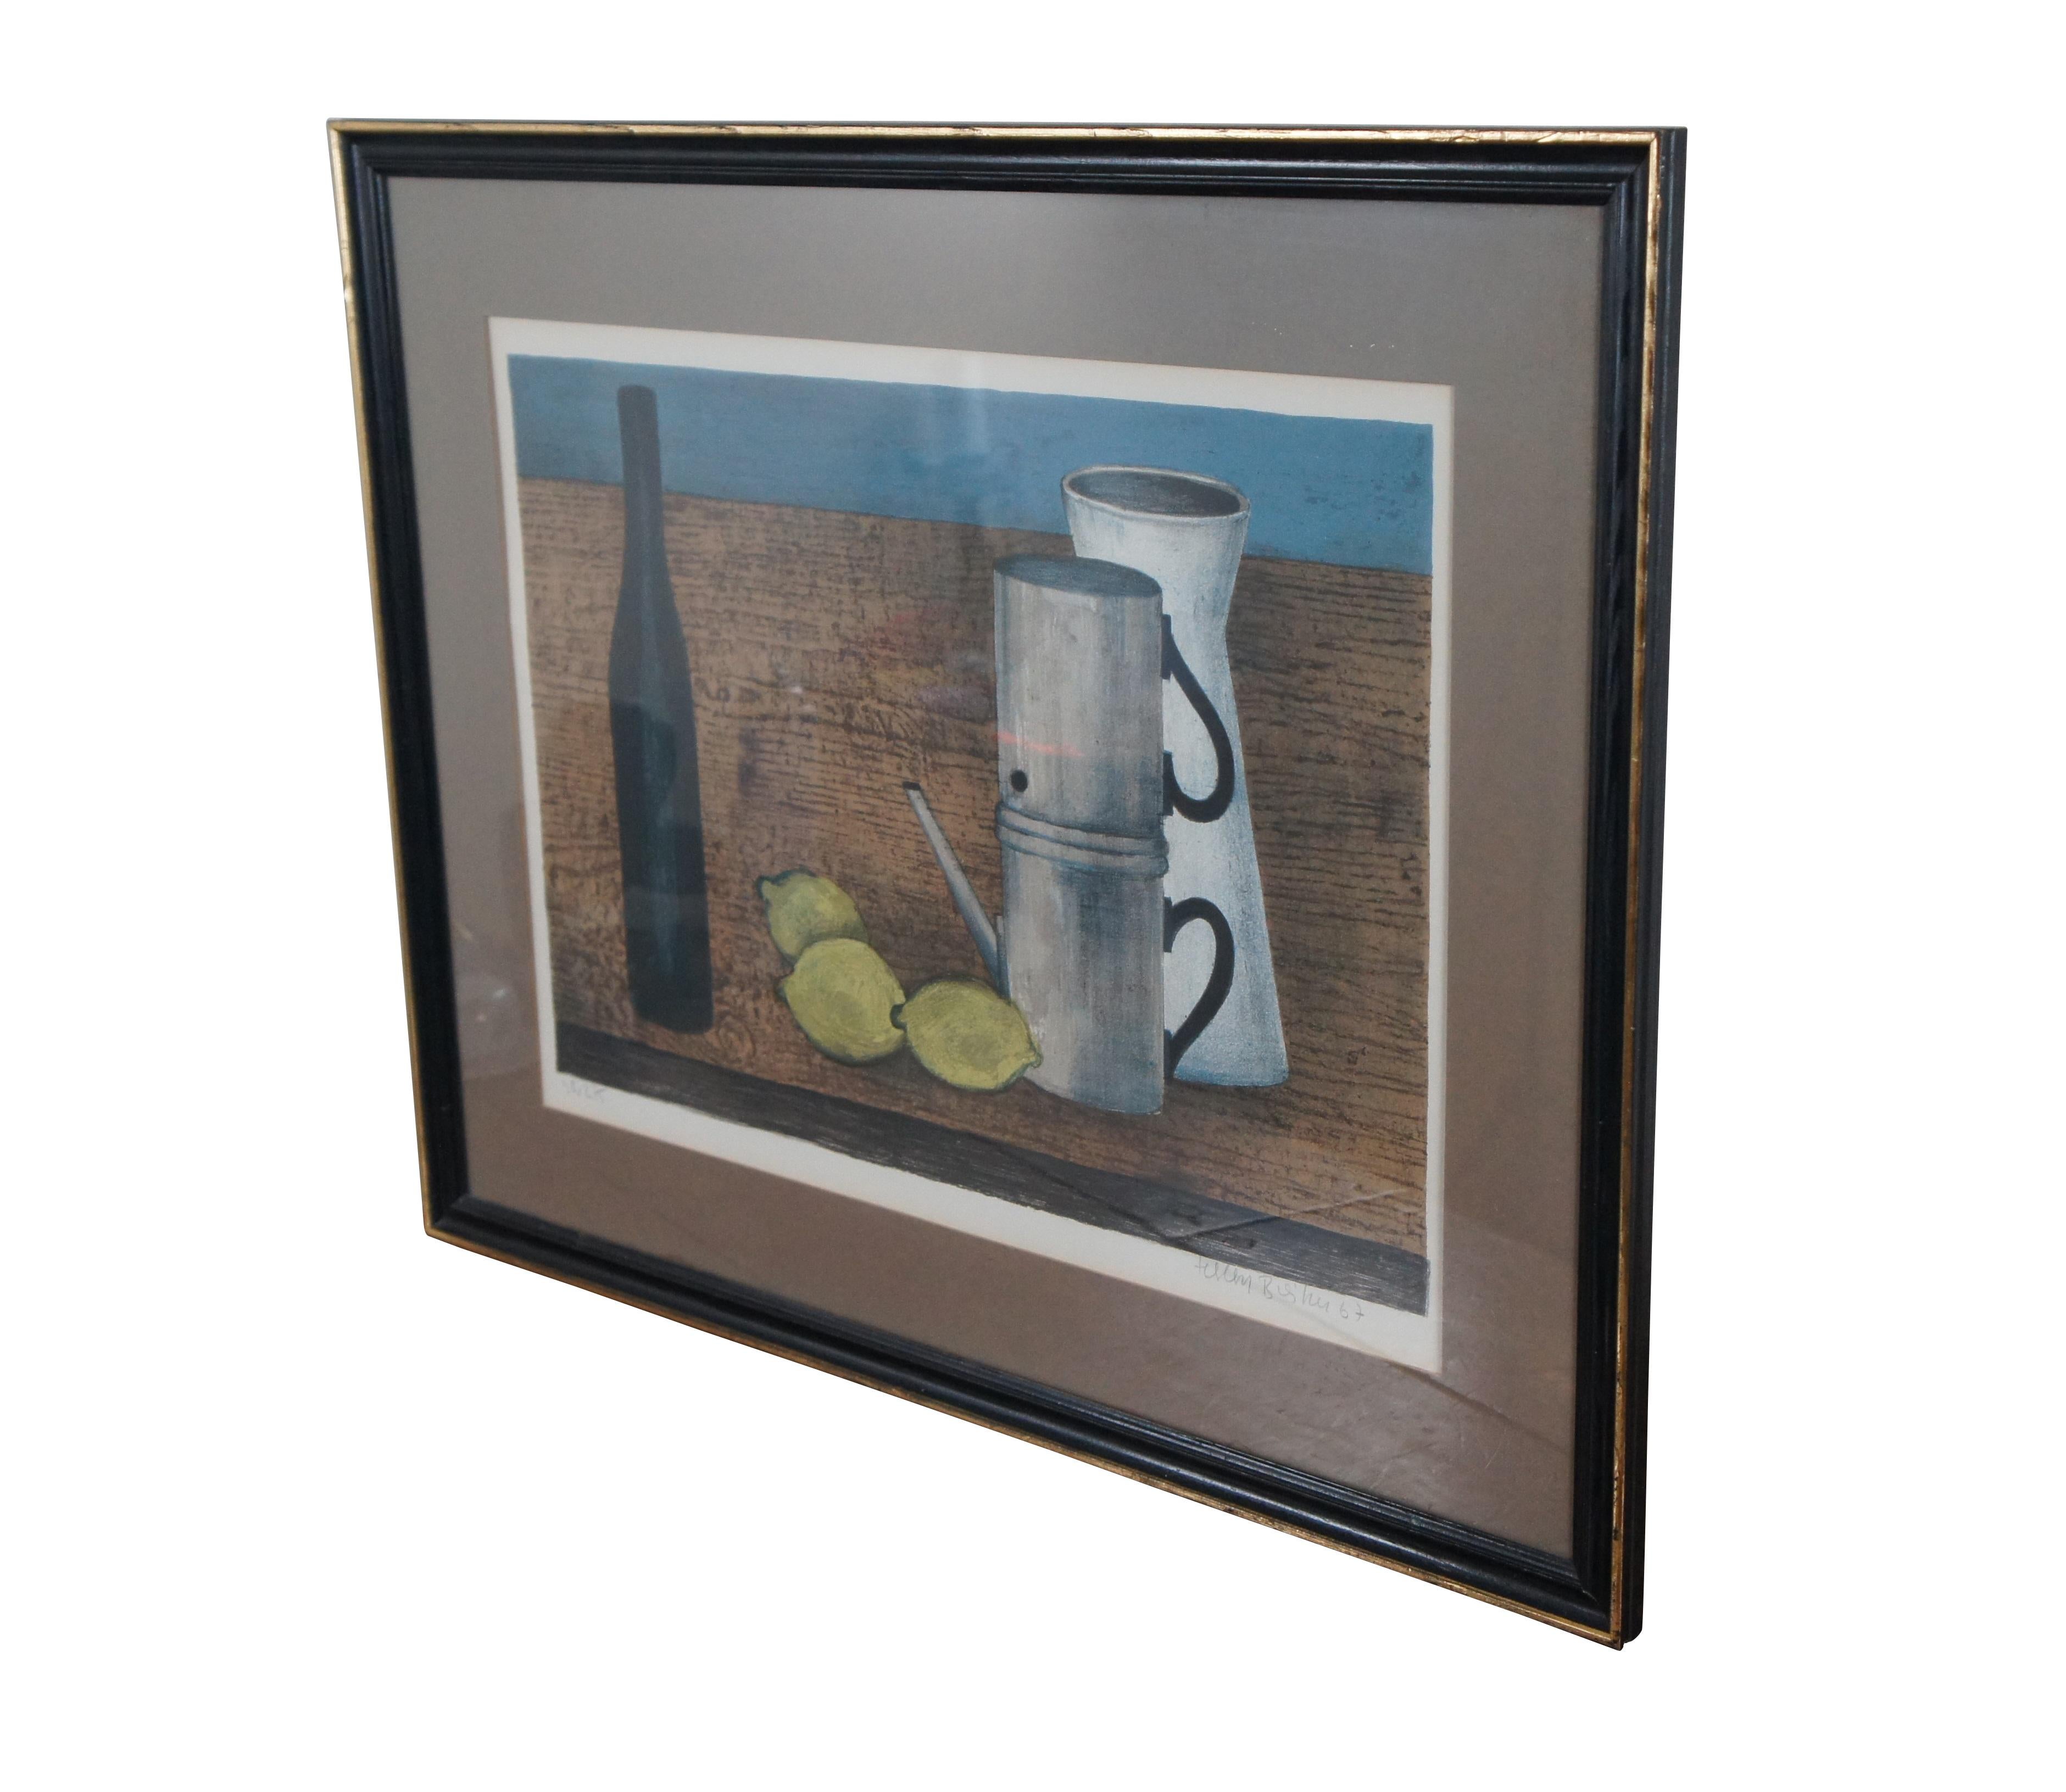 Vintage 1967 pencil signed limited edition lithograph print by Herbert Breiter, showing a still life of a bottle, lemons, vase and coffee pot on a brown table. Pencil signed and numbered 58/275 along lower edge. The Collector's Guild Ltd.